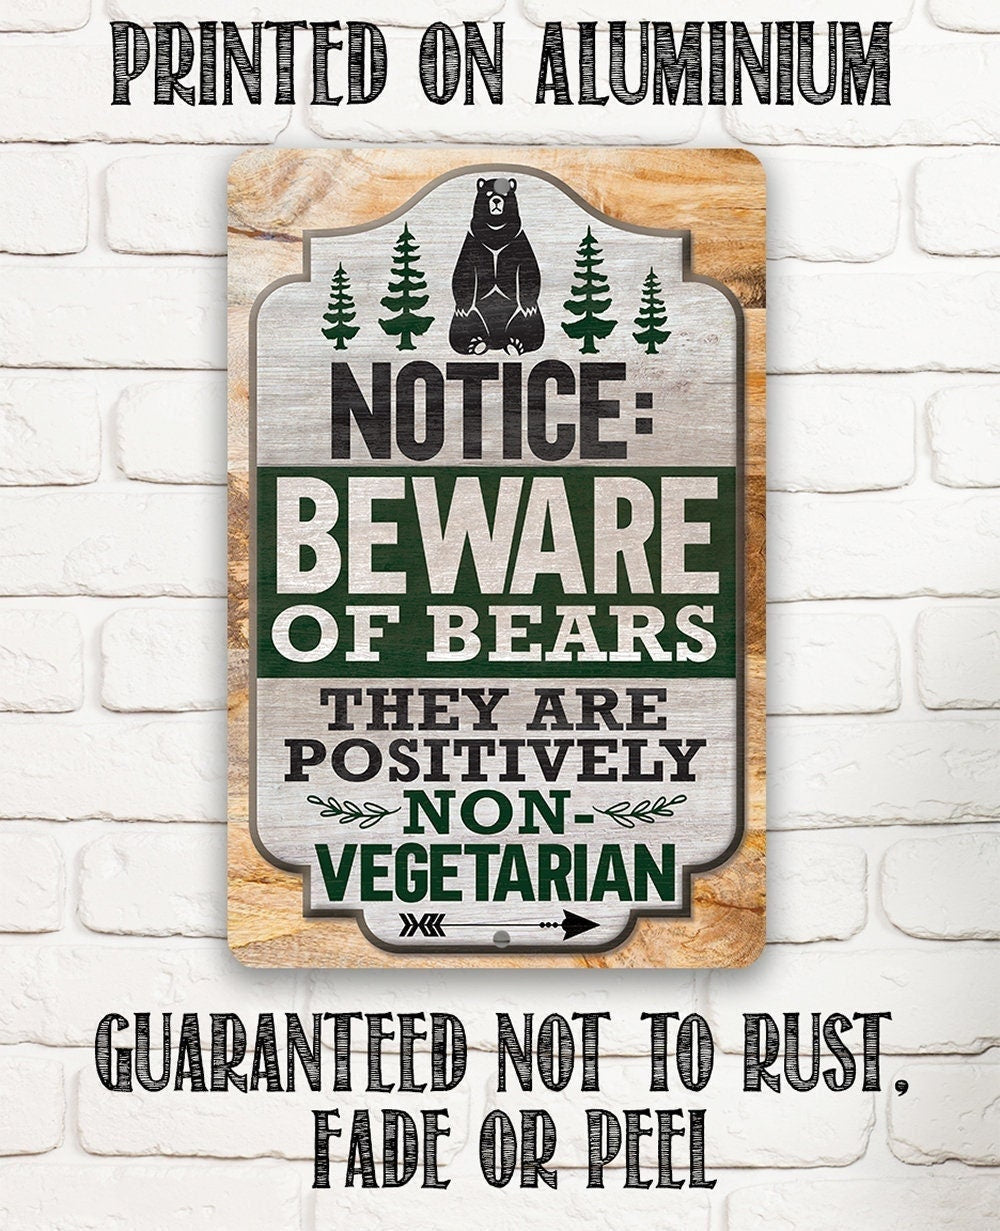 Notice: Beware of Bears, They Are Positively Non-Vegetarian - Metal Sign Metal Sign Lone Star Art 